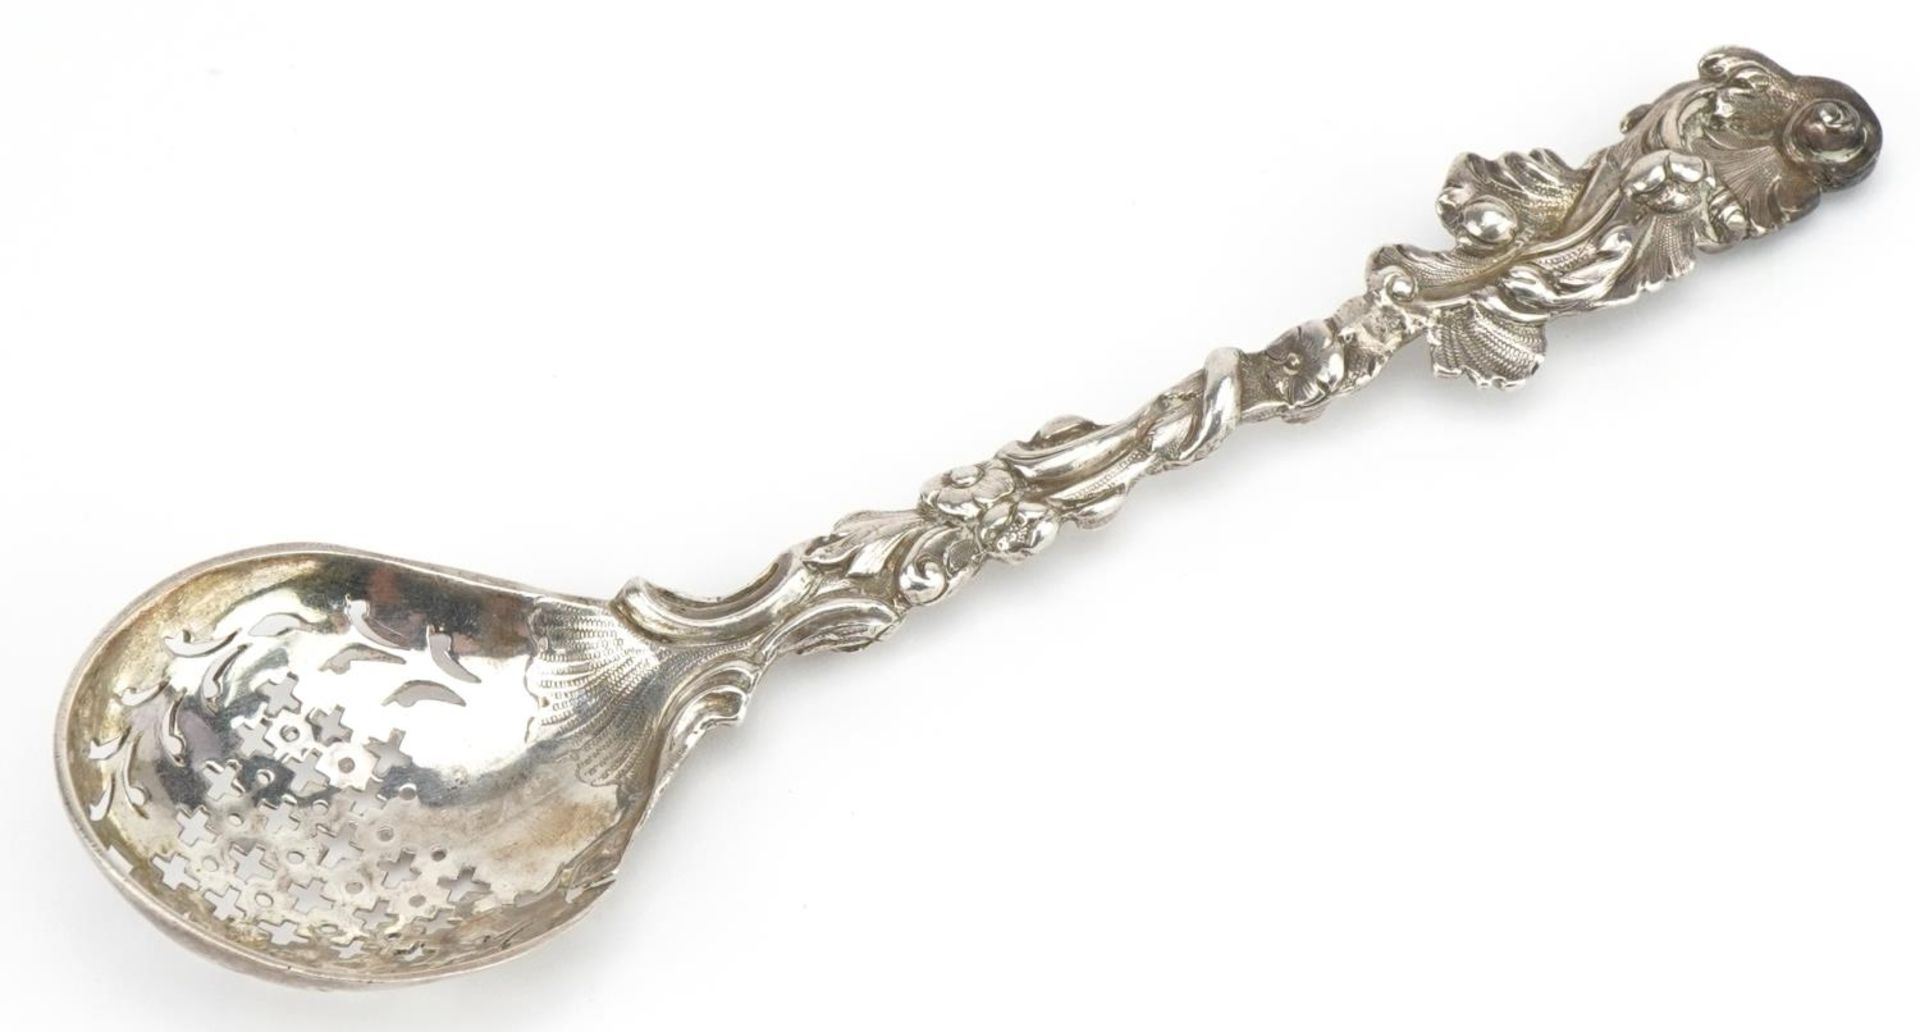 William Robert Smily, Victorian cast silver sifting spoon with naturalistic handle, London 1848,